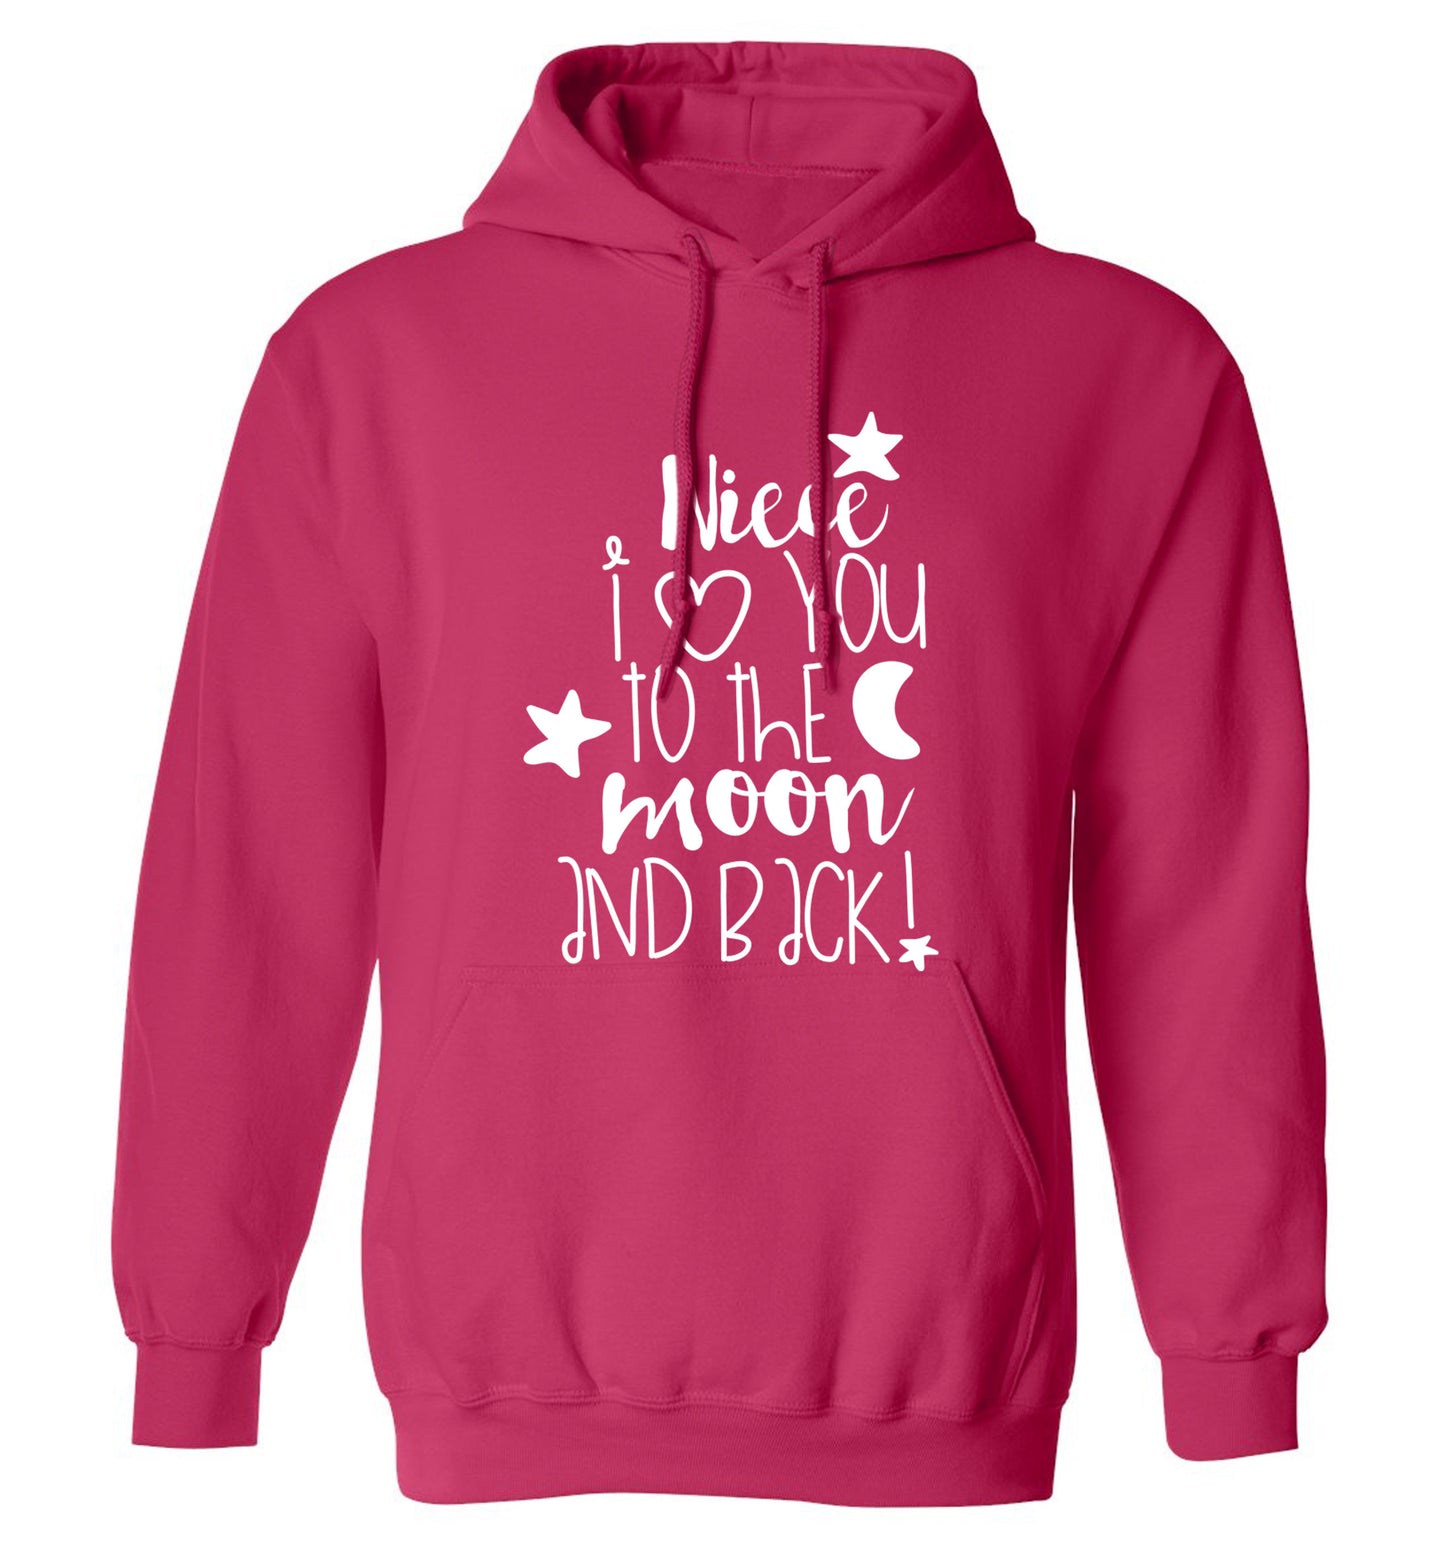 Niece I love you to the moon and back adults unisex pink hoodie 2XL